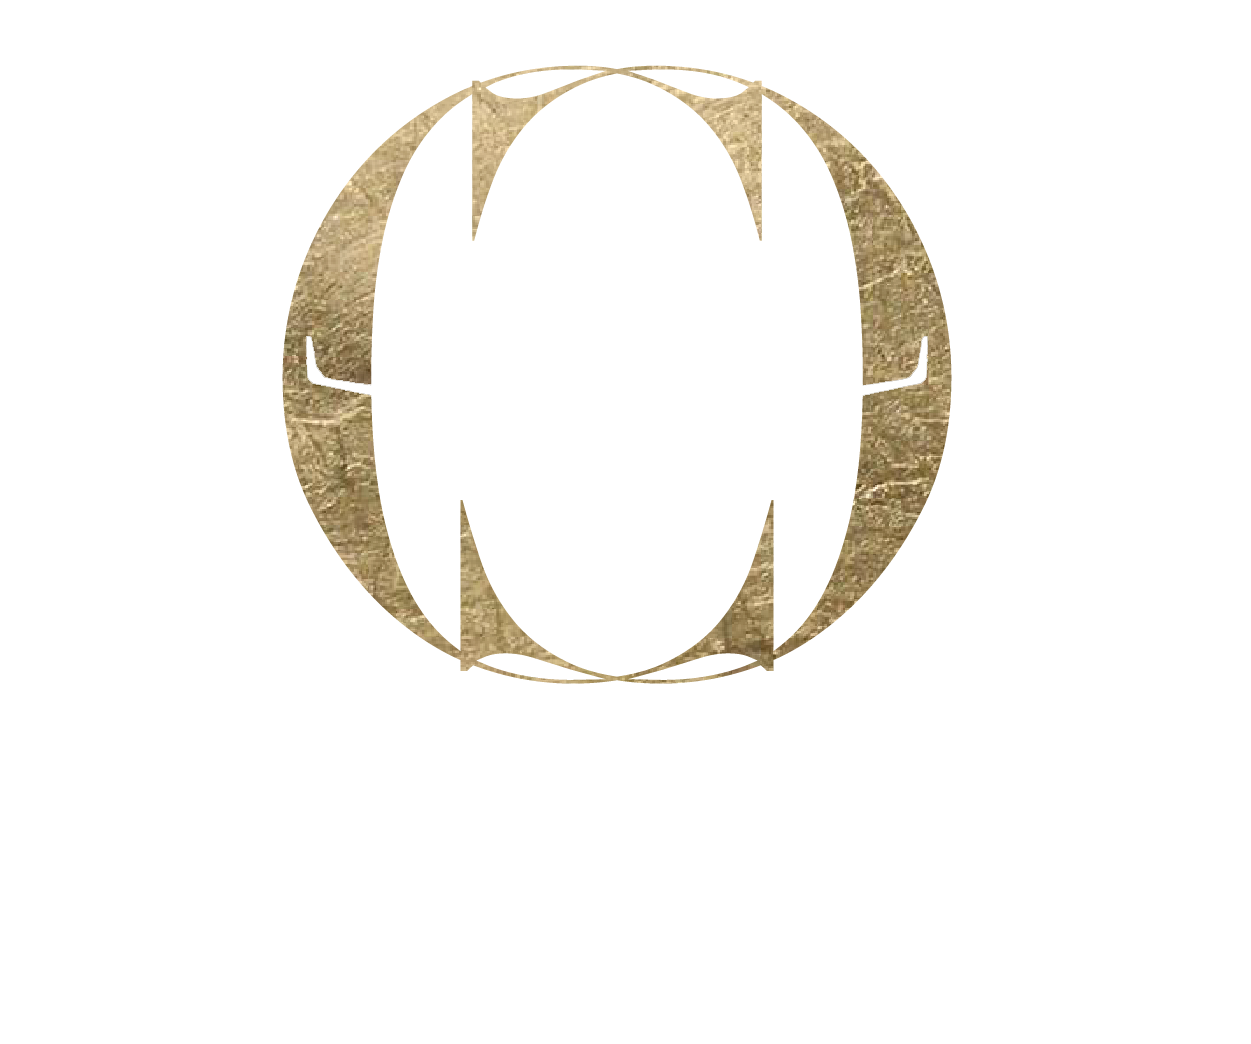 Cabin Crafters